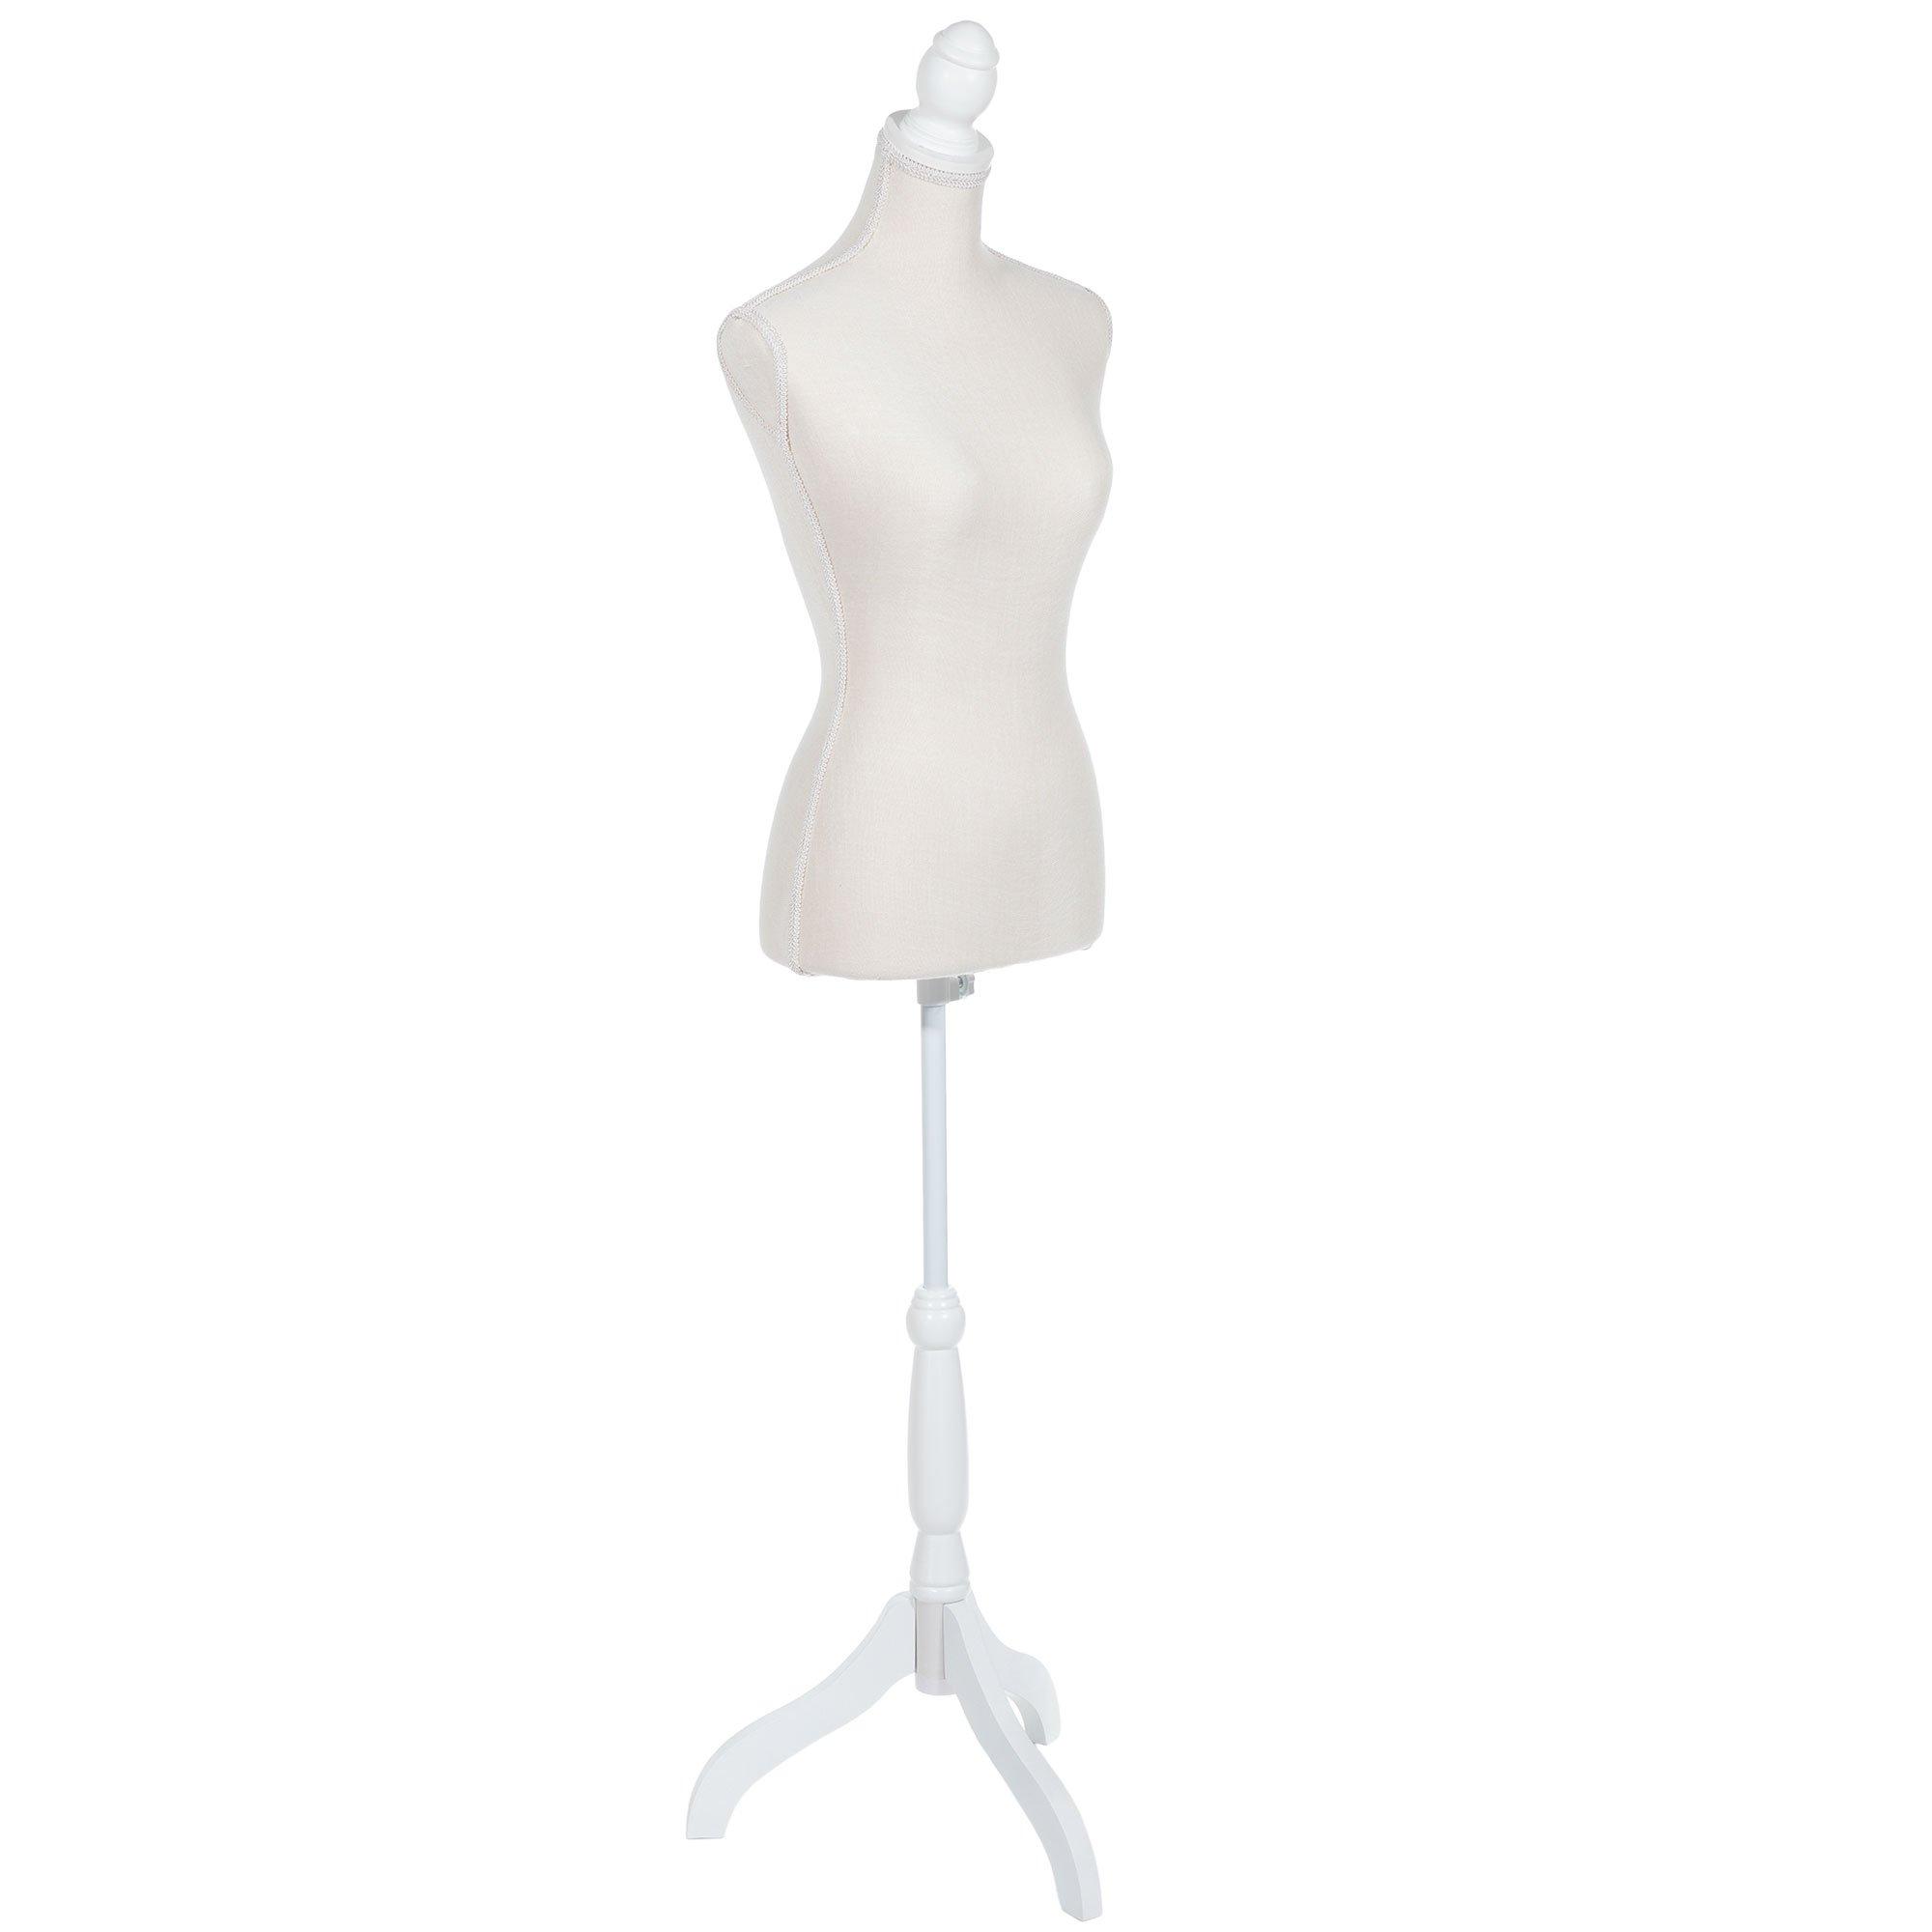 Child Mannequin Stand In White For 5T to 7 Child Clothe Size